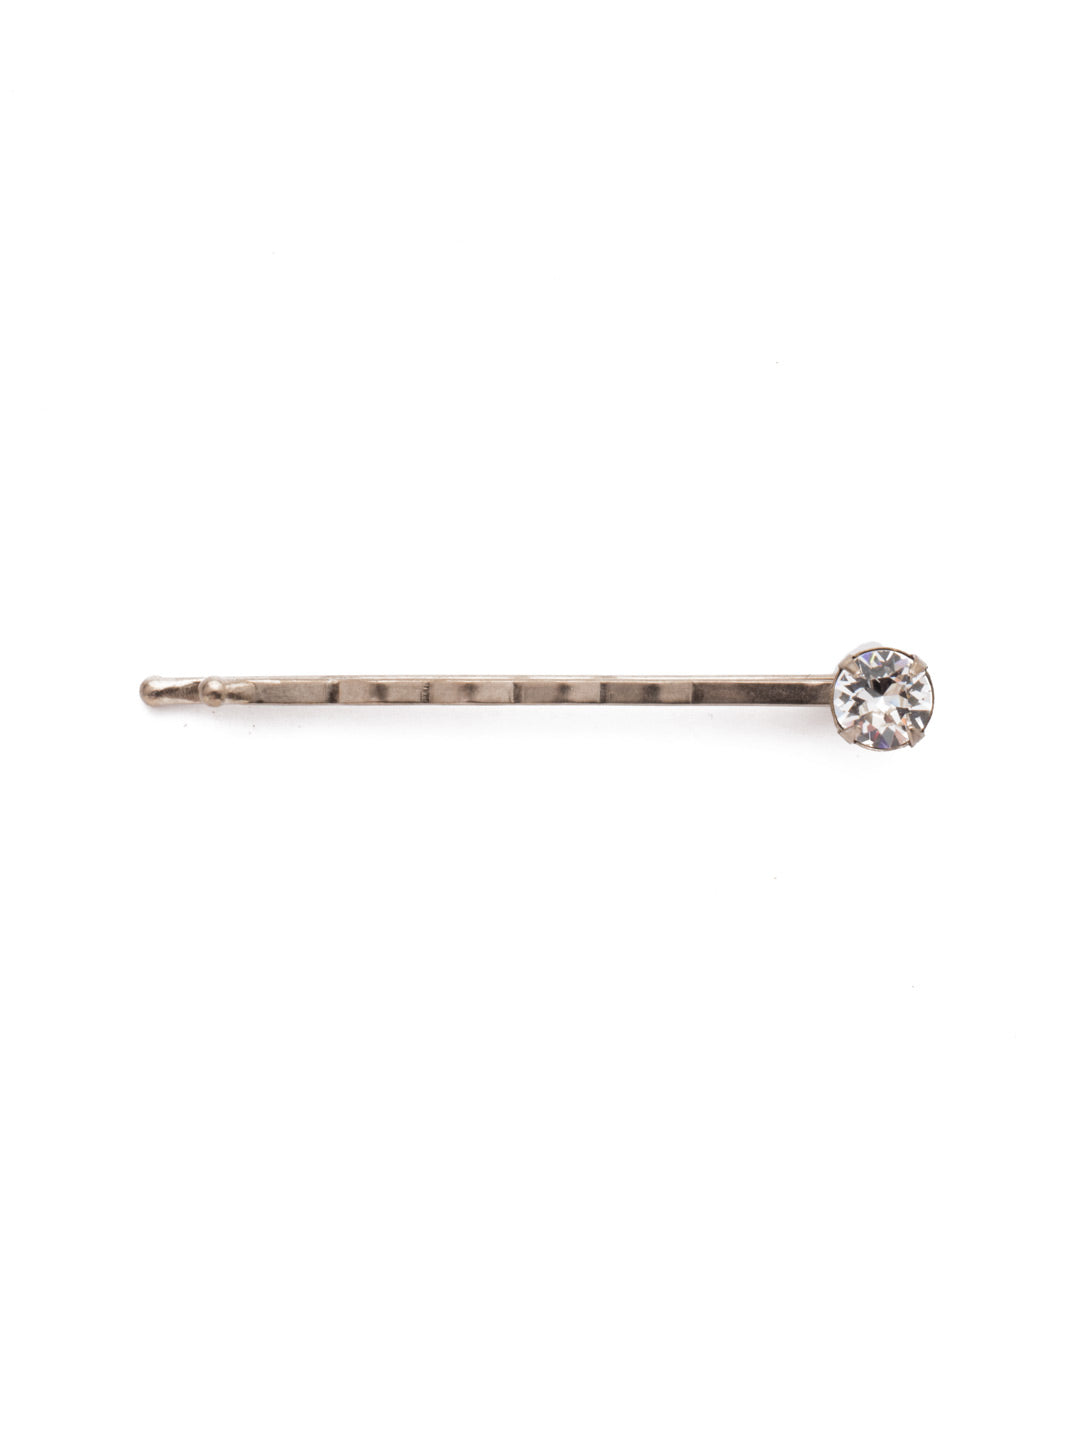 Single Crystal Hair Pin - HEP40ASCRY - <p>The Single Crystal Hair Pin features a single round cut crystal at the end of a classic and functional bobby pin, elevating your hairstyle. From Sorrelli's Crystal collection in our Antique Silver-tone finish.</p>